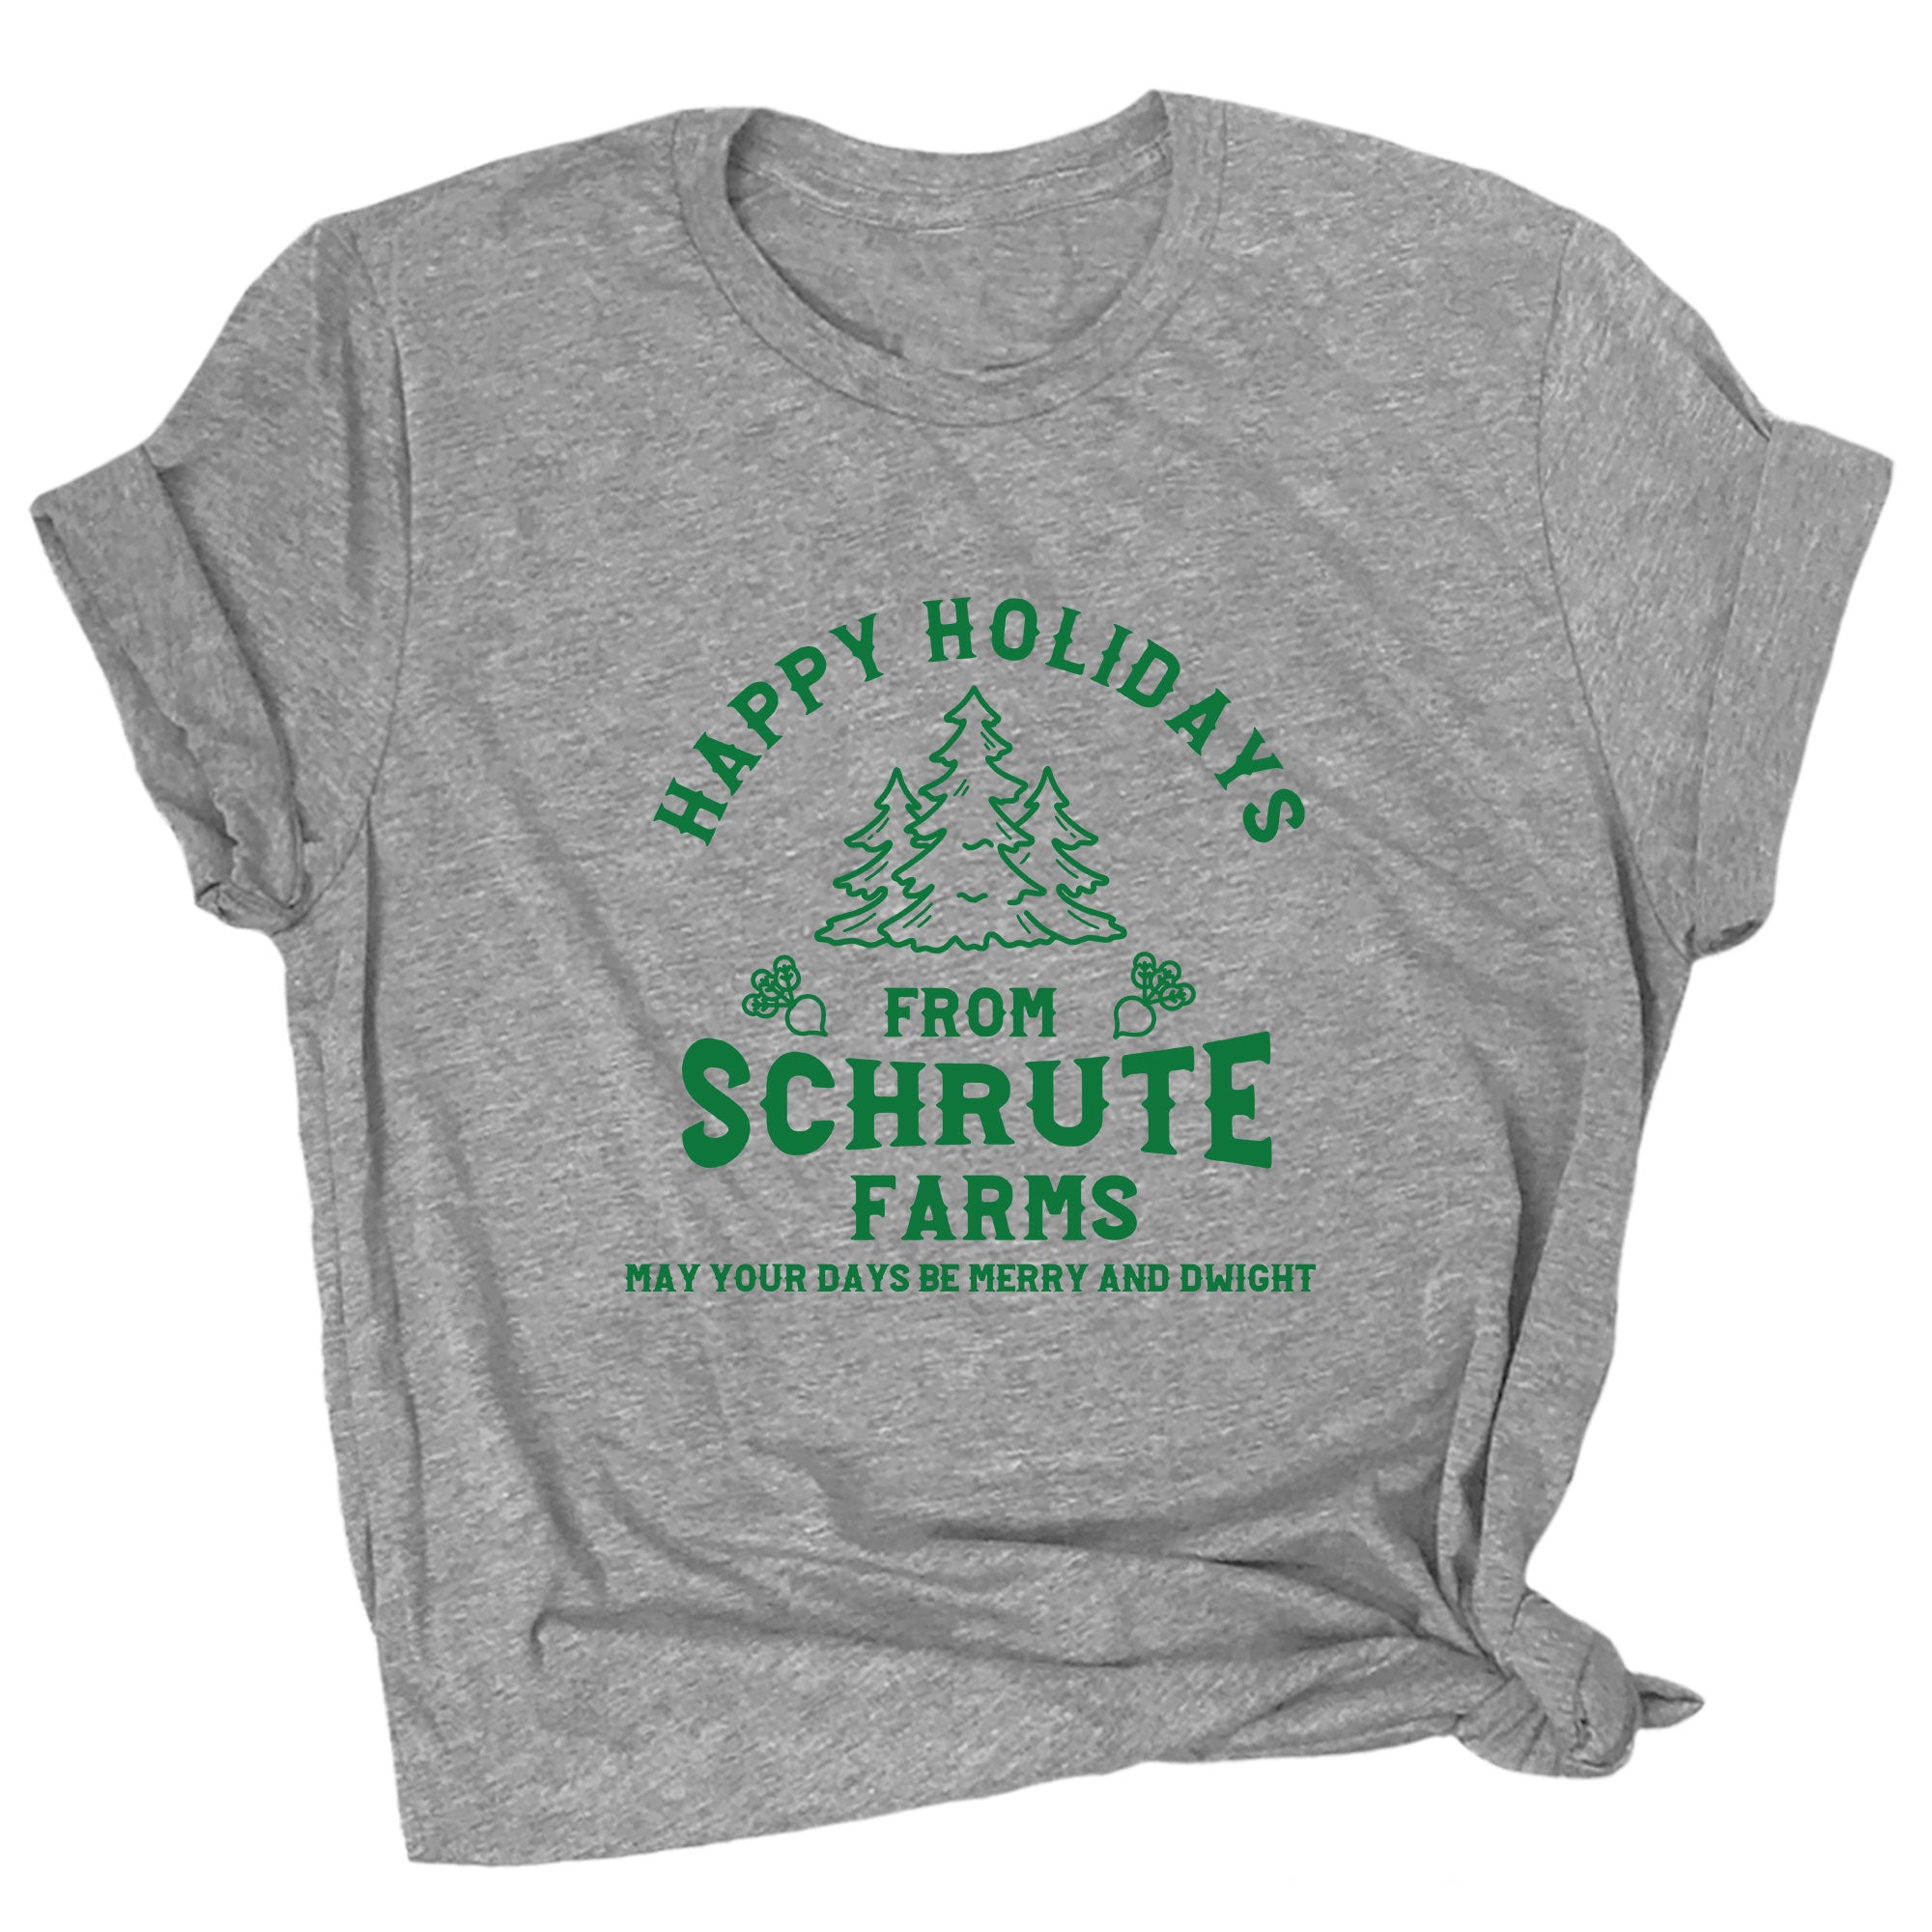 Happy Holidays from Schrute Farms Premium Unisex T-Shirt